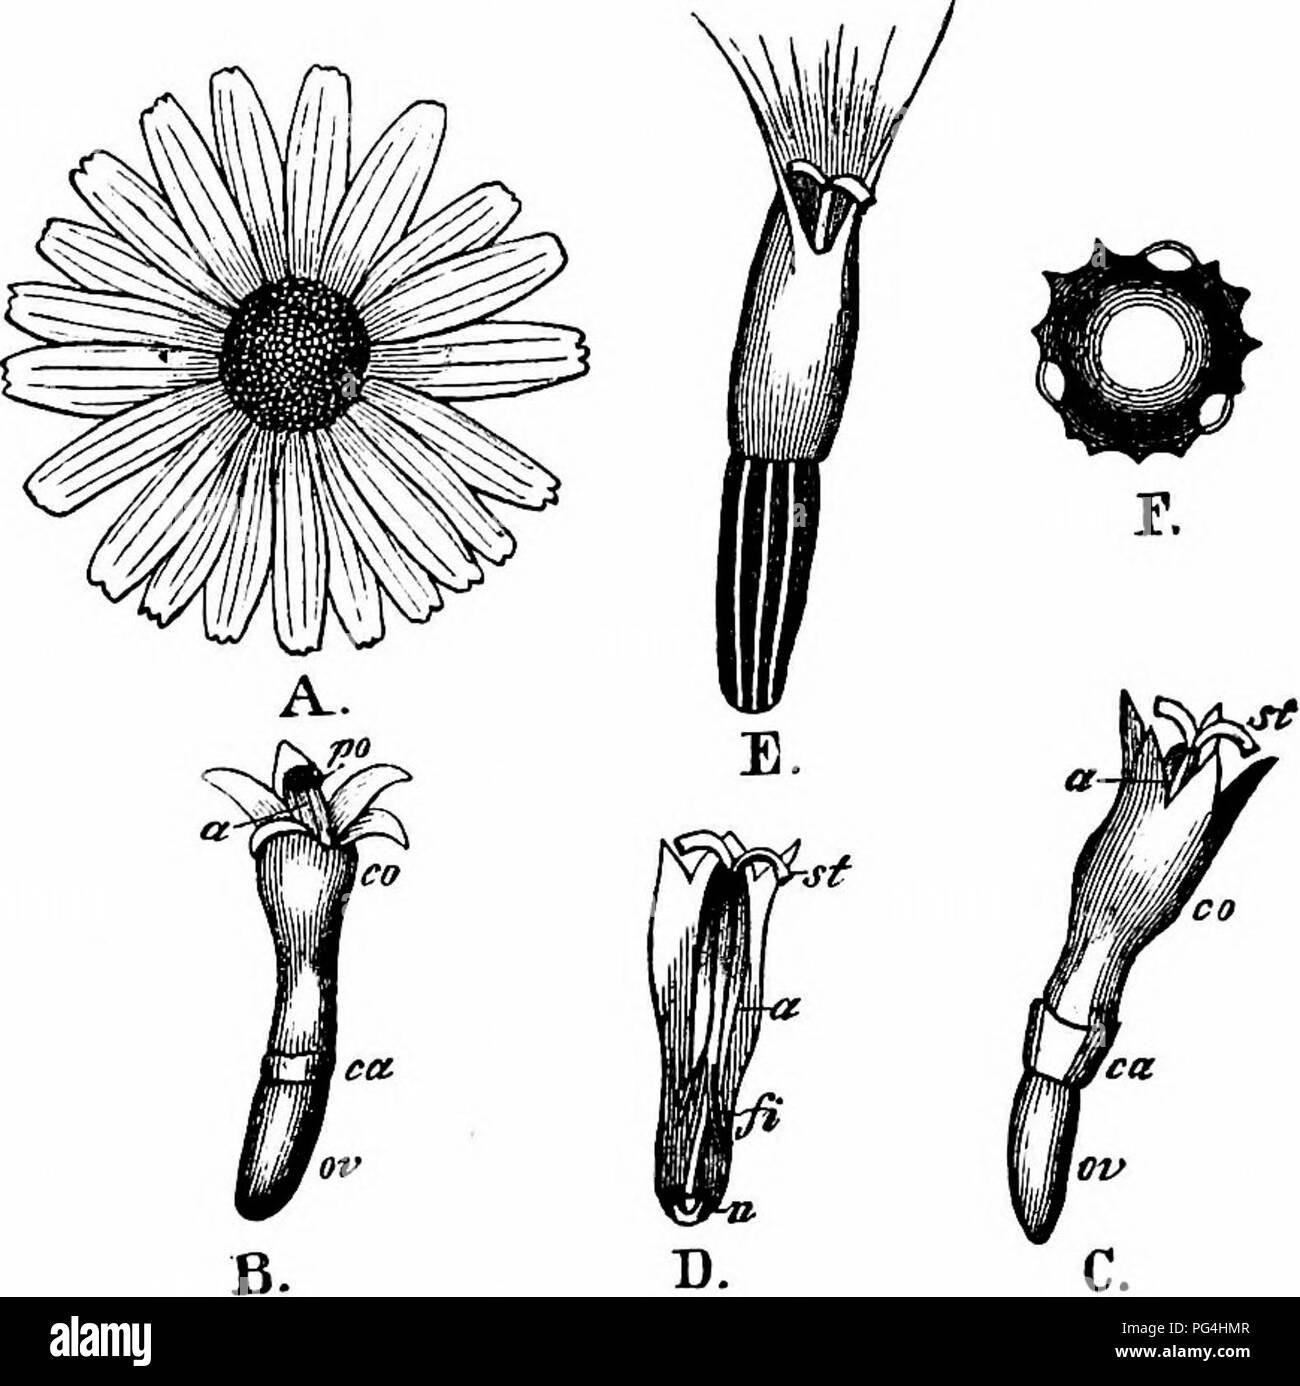 . Handbook of flower pollination : based upon Hermann Mu?ller's work 'The fertilisation of flowers by insects' . Fertilization of plants. COMPOSITAE 625 1476. T. atratum Sch. Bip. (=Chrysanthemum tAvaXamJacq., and C. coronopi- folium Vill.). (Herm. MuUer, 'Alpenblumen,' p. 432.)— The flower mechanism of this species agrees completely with that of the last one. Visitors.—Herm. Miiller observed 7 flies. 1477' T. macrophyllum Sch. Bip. (=Chrysanthemum macrophyllum Waldst. et Kit., and Pyre thrum macrophyllum Willi).— Visitors.—Loew observed the following in the Berlin Botanic Garden.— A. Coleopte Stock Photo